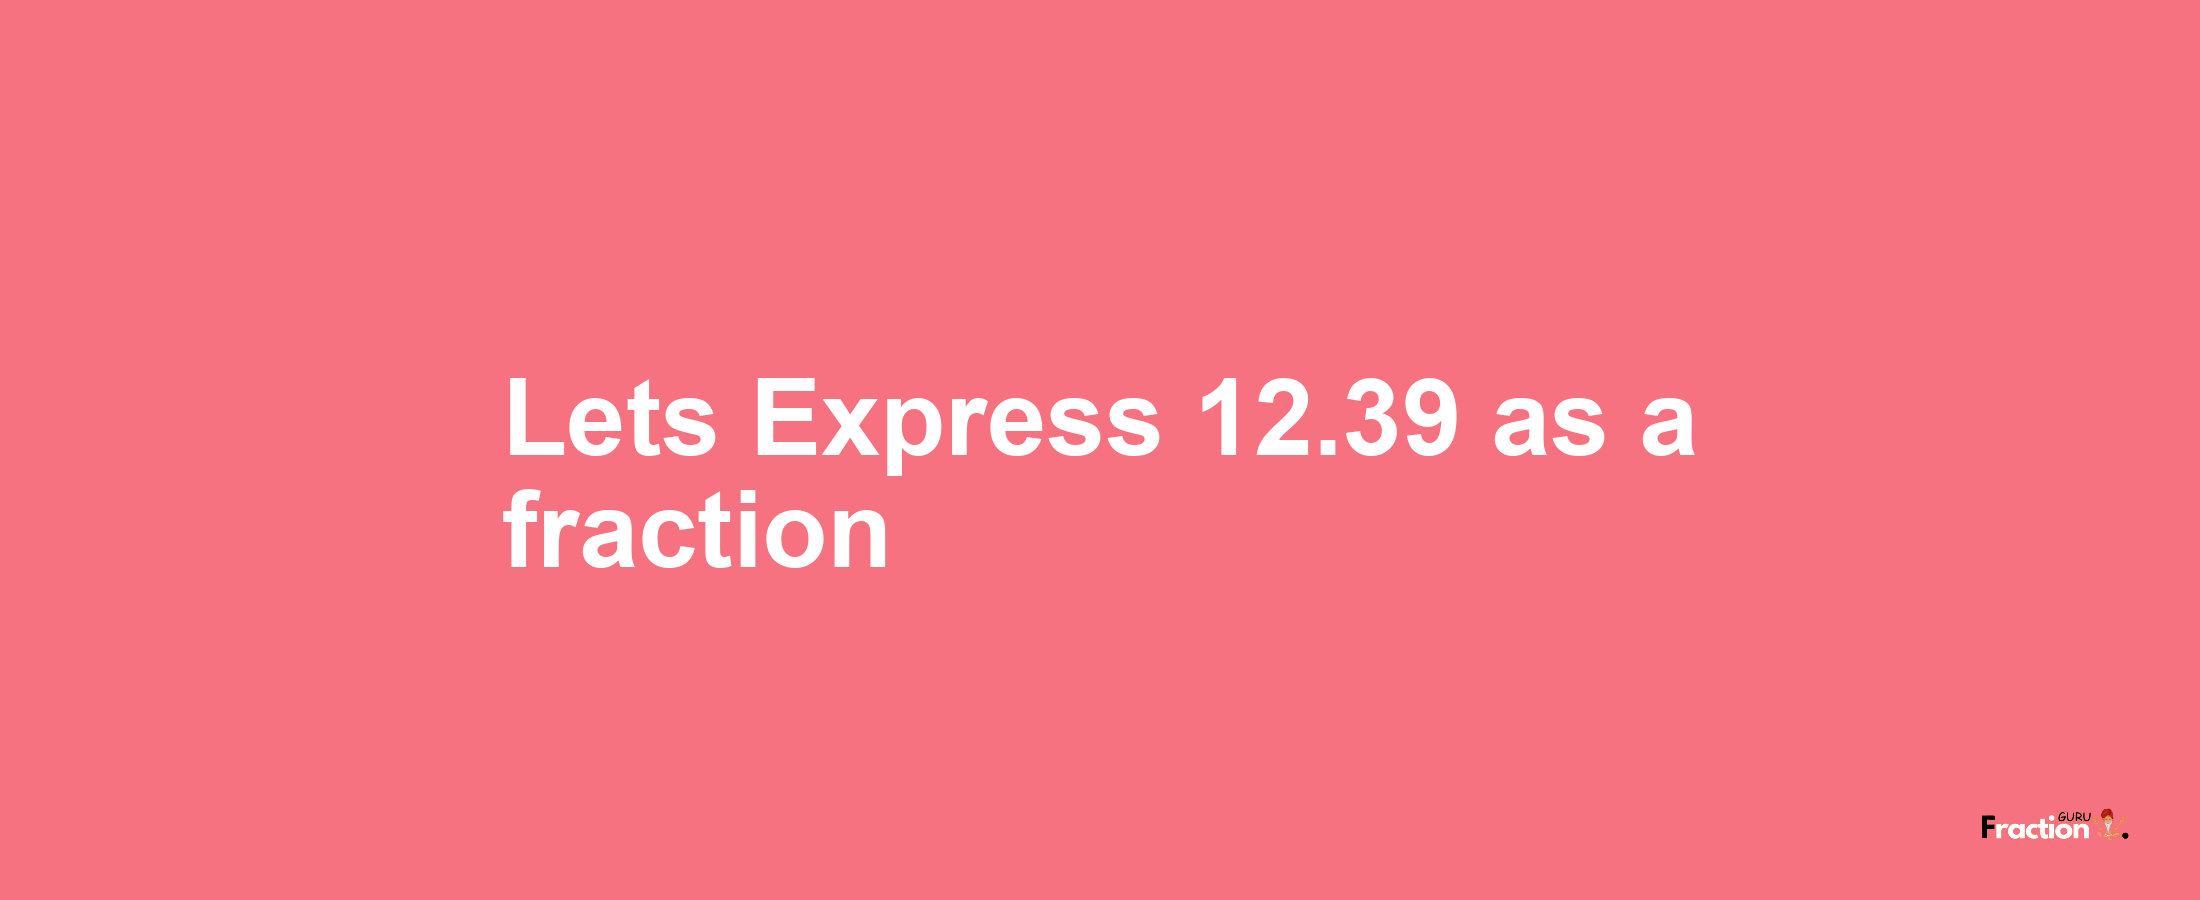 Lets Express 12.39 as afraction